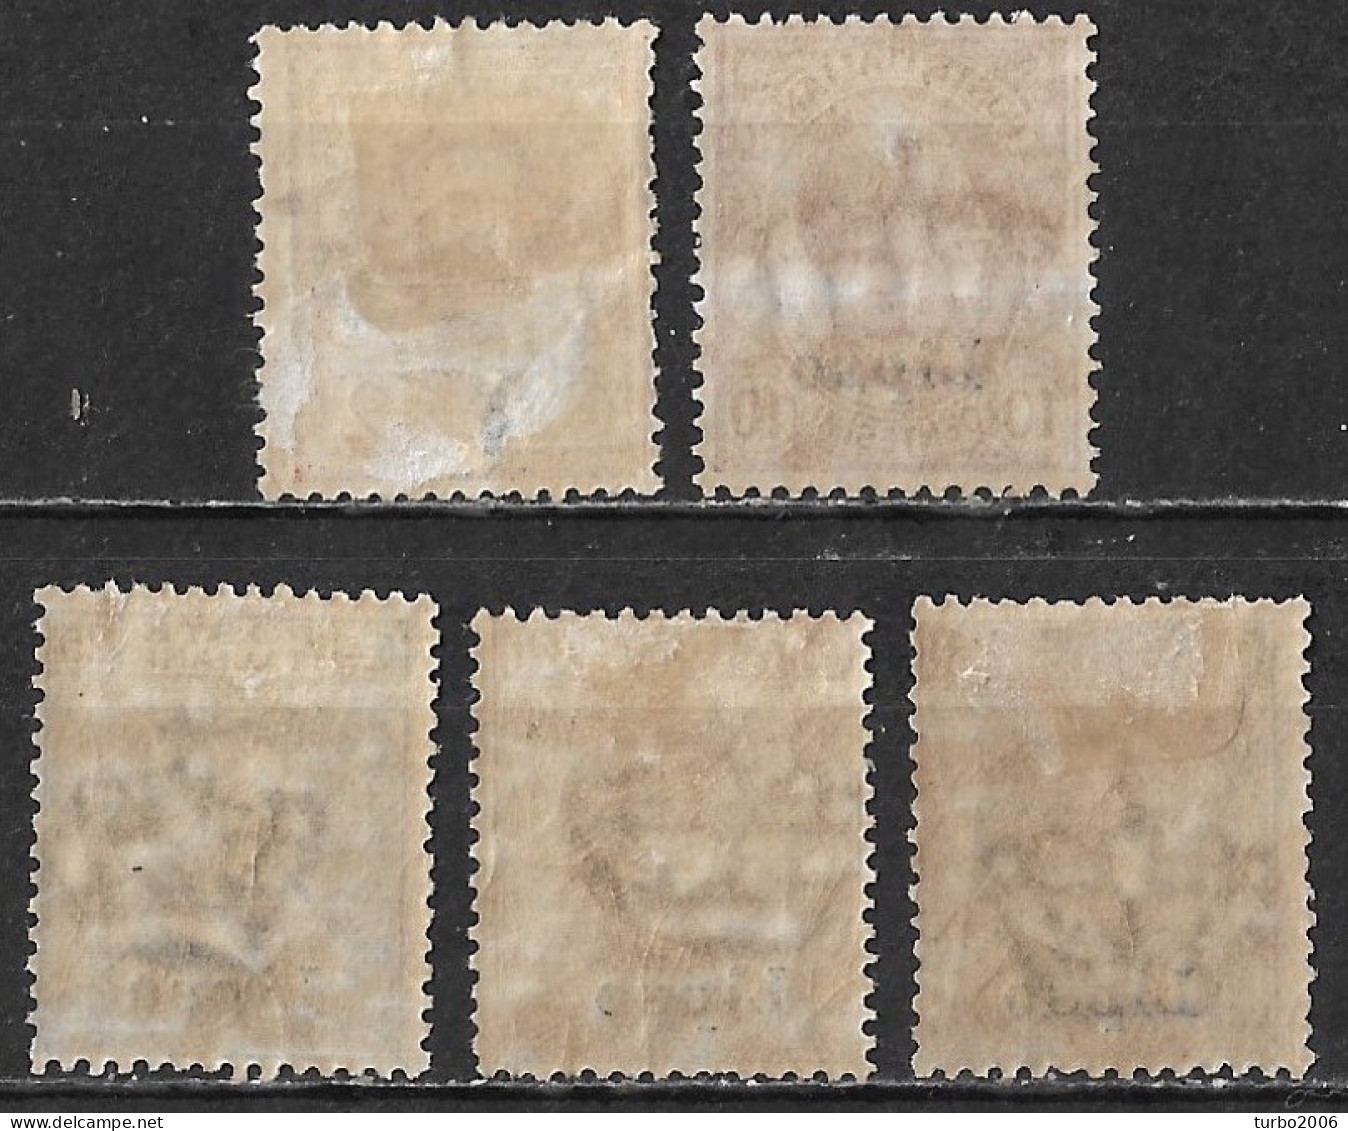 DODECANESE 1912 Italian Stamps With Black Overprint LIPSO 5 Values From The Set Vl. 1-3-5/7 MH - Dodecaneso